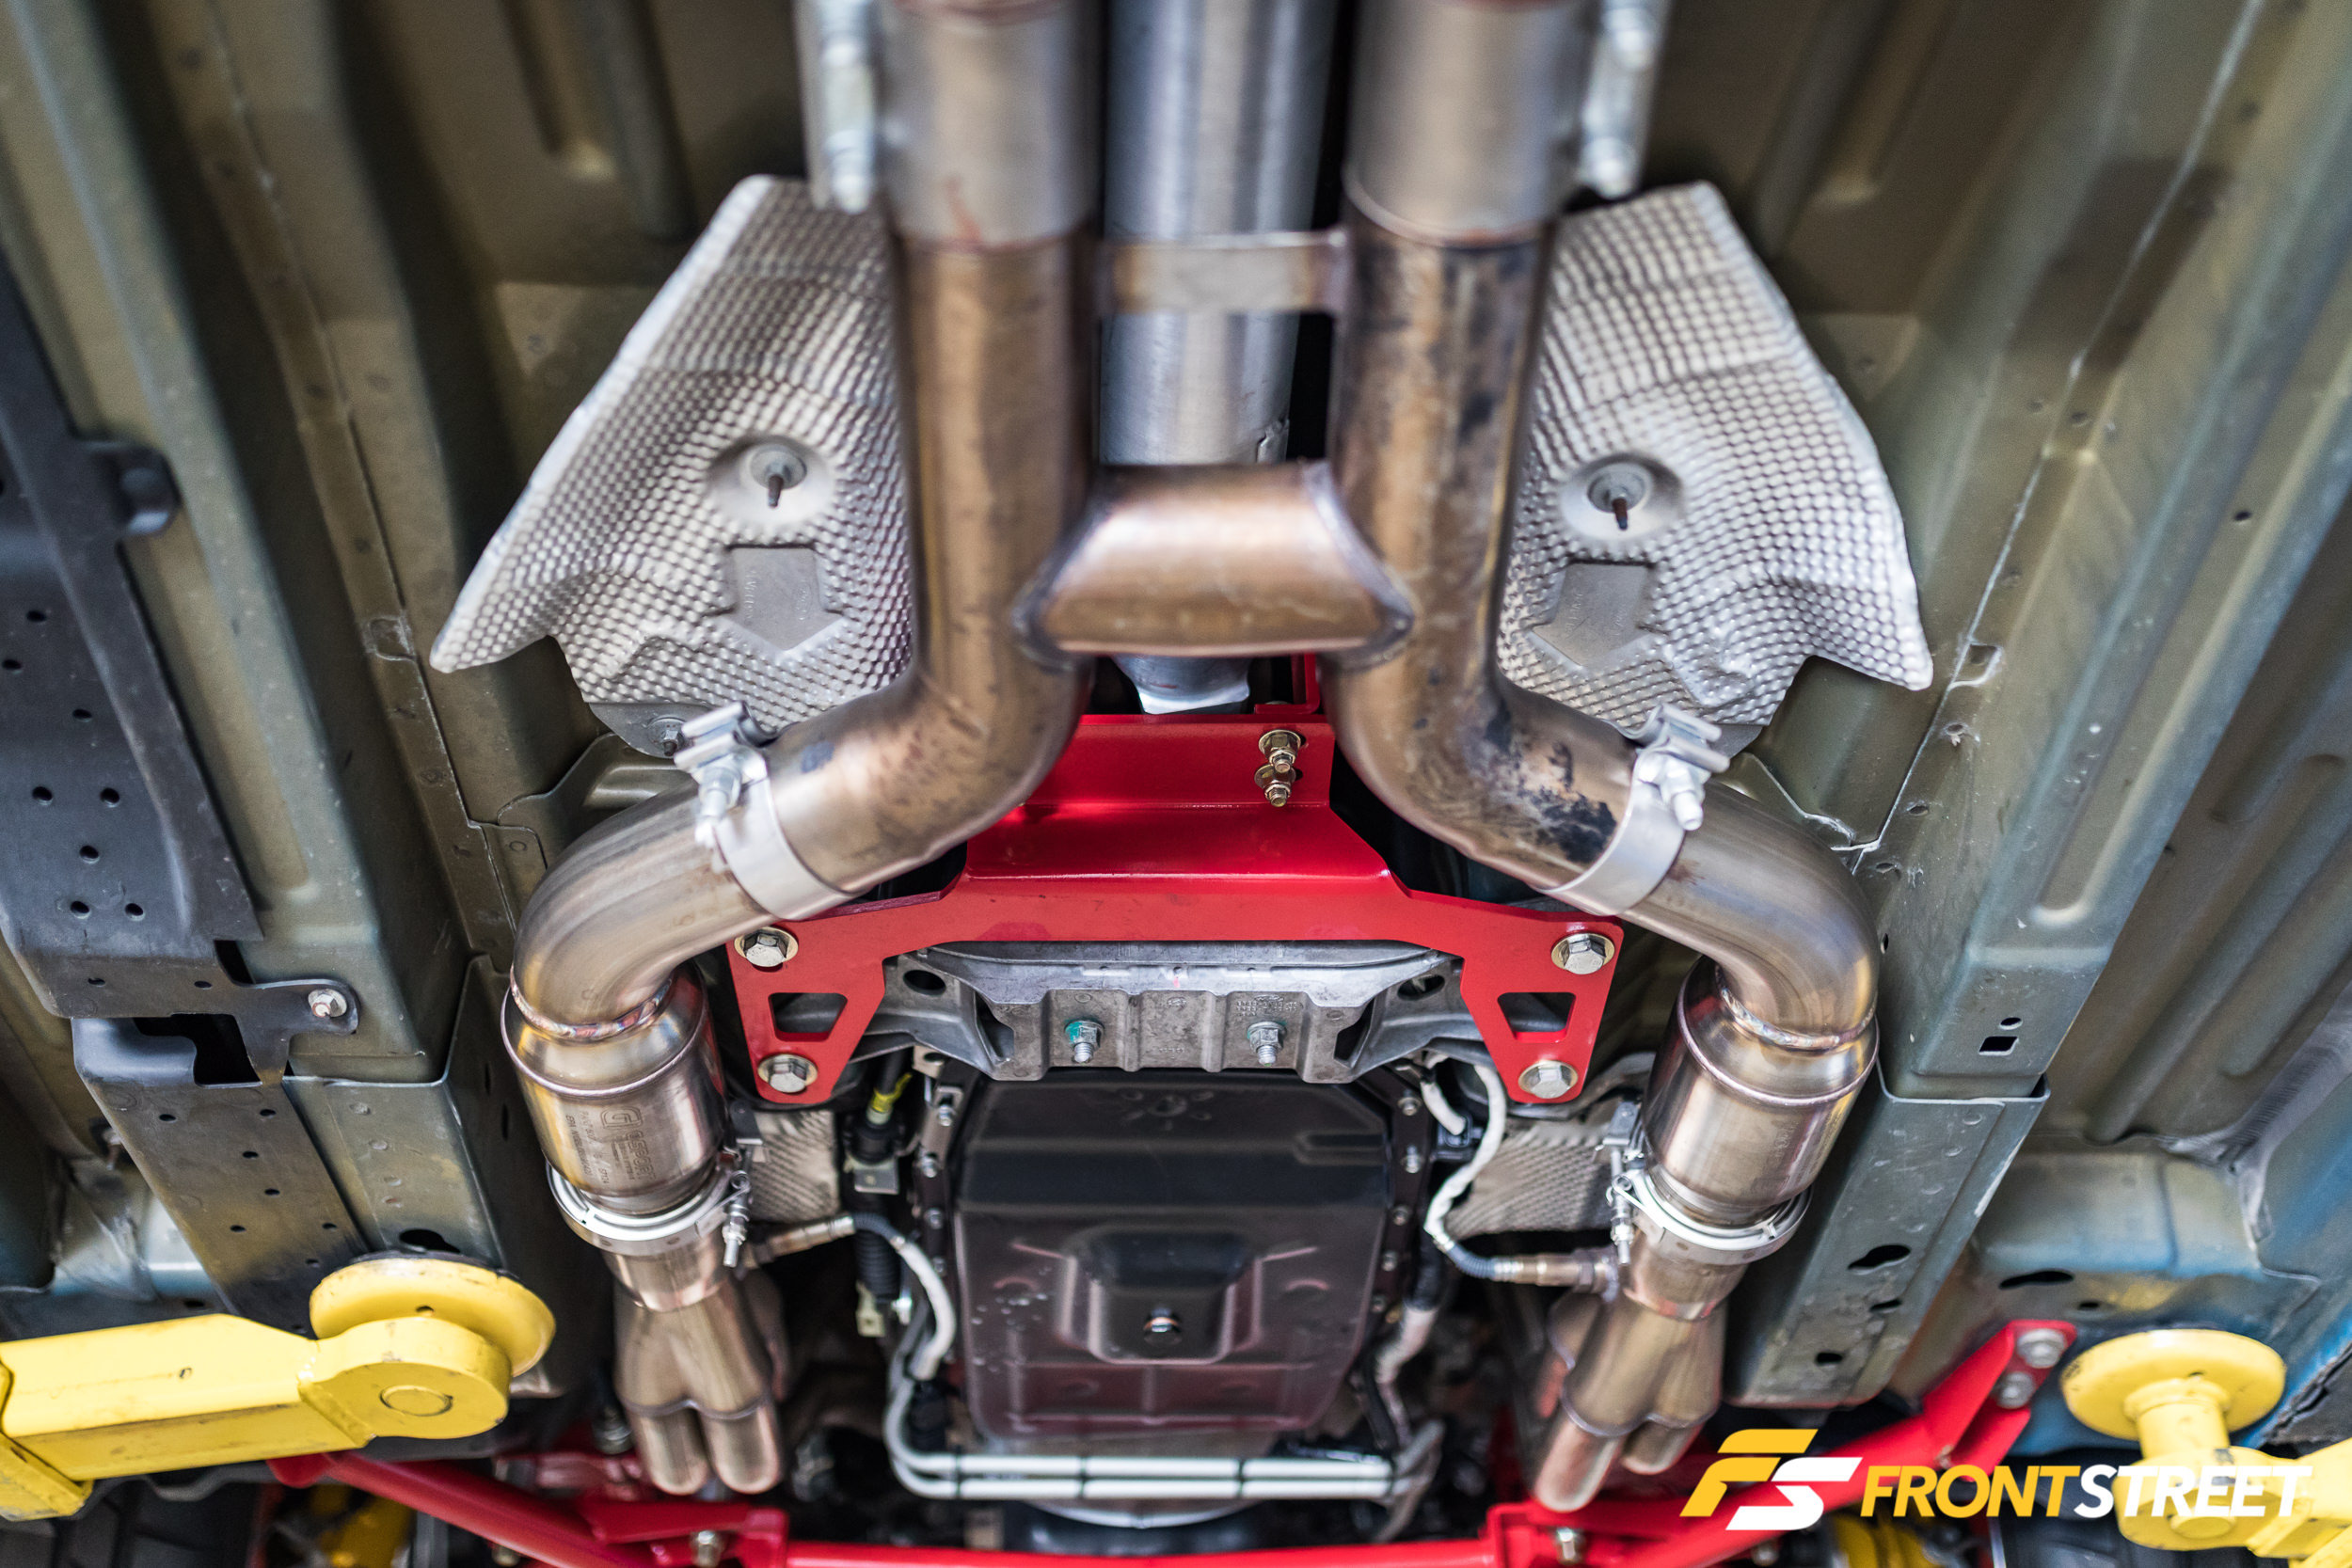 Clean Air: G-Sport’s Catalytic Converters Offer Power Without Compromise